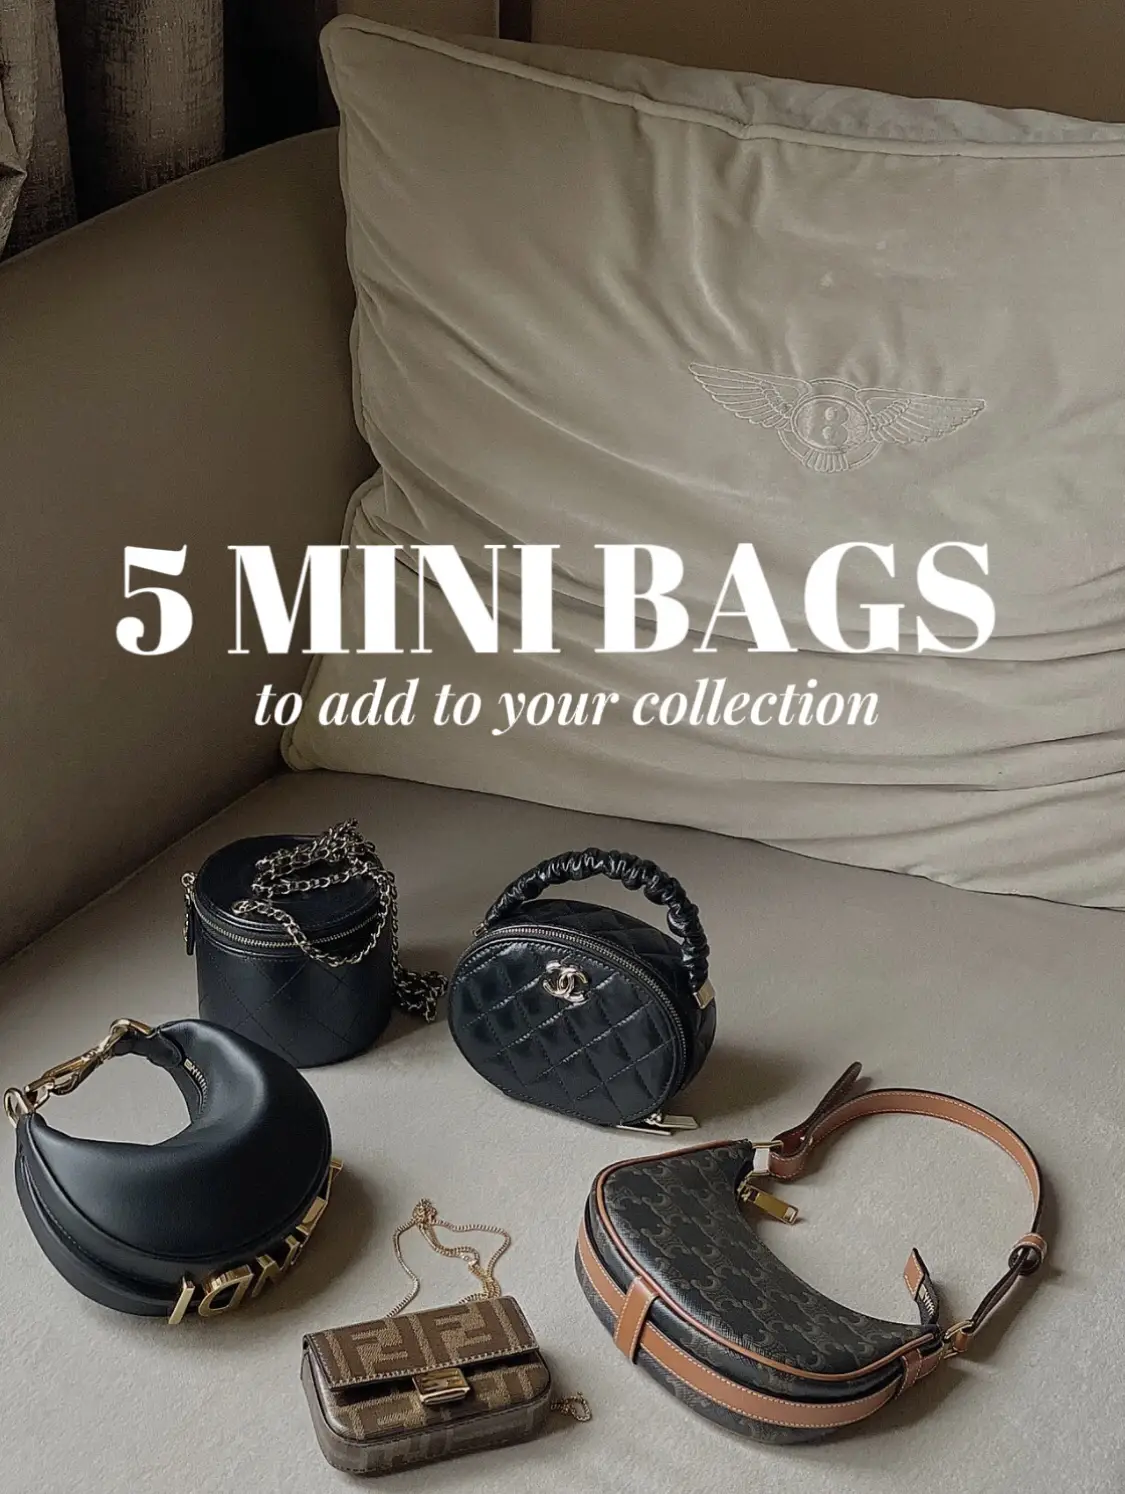 5 mini bags to add to your collection